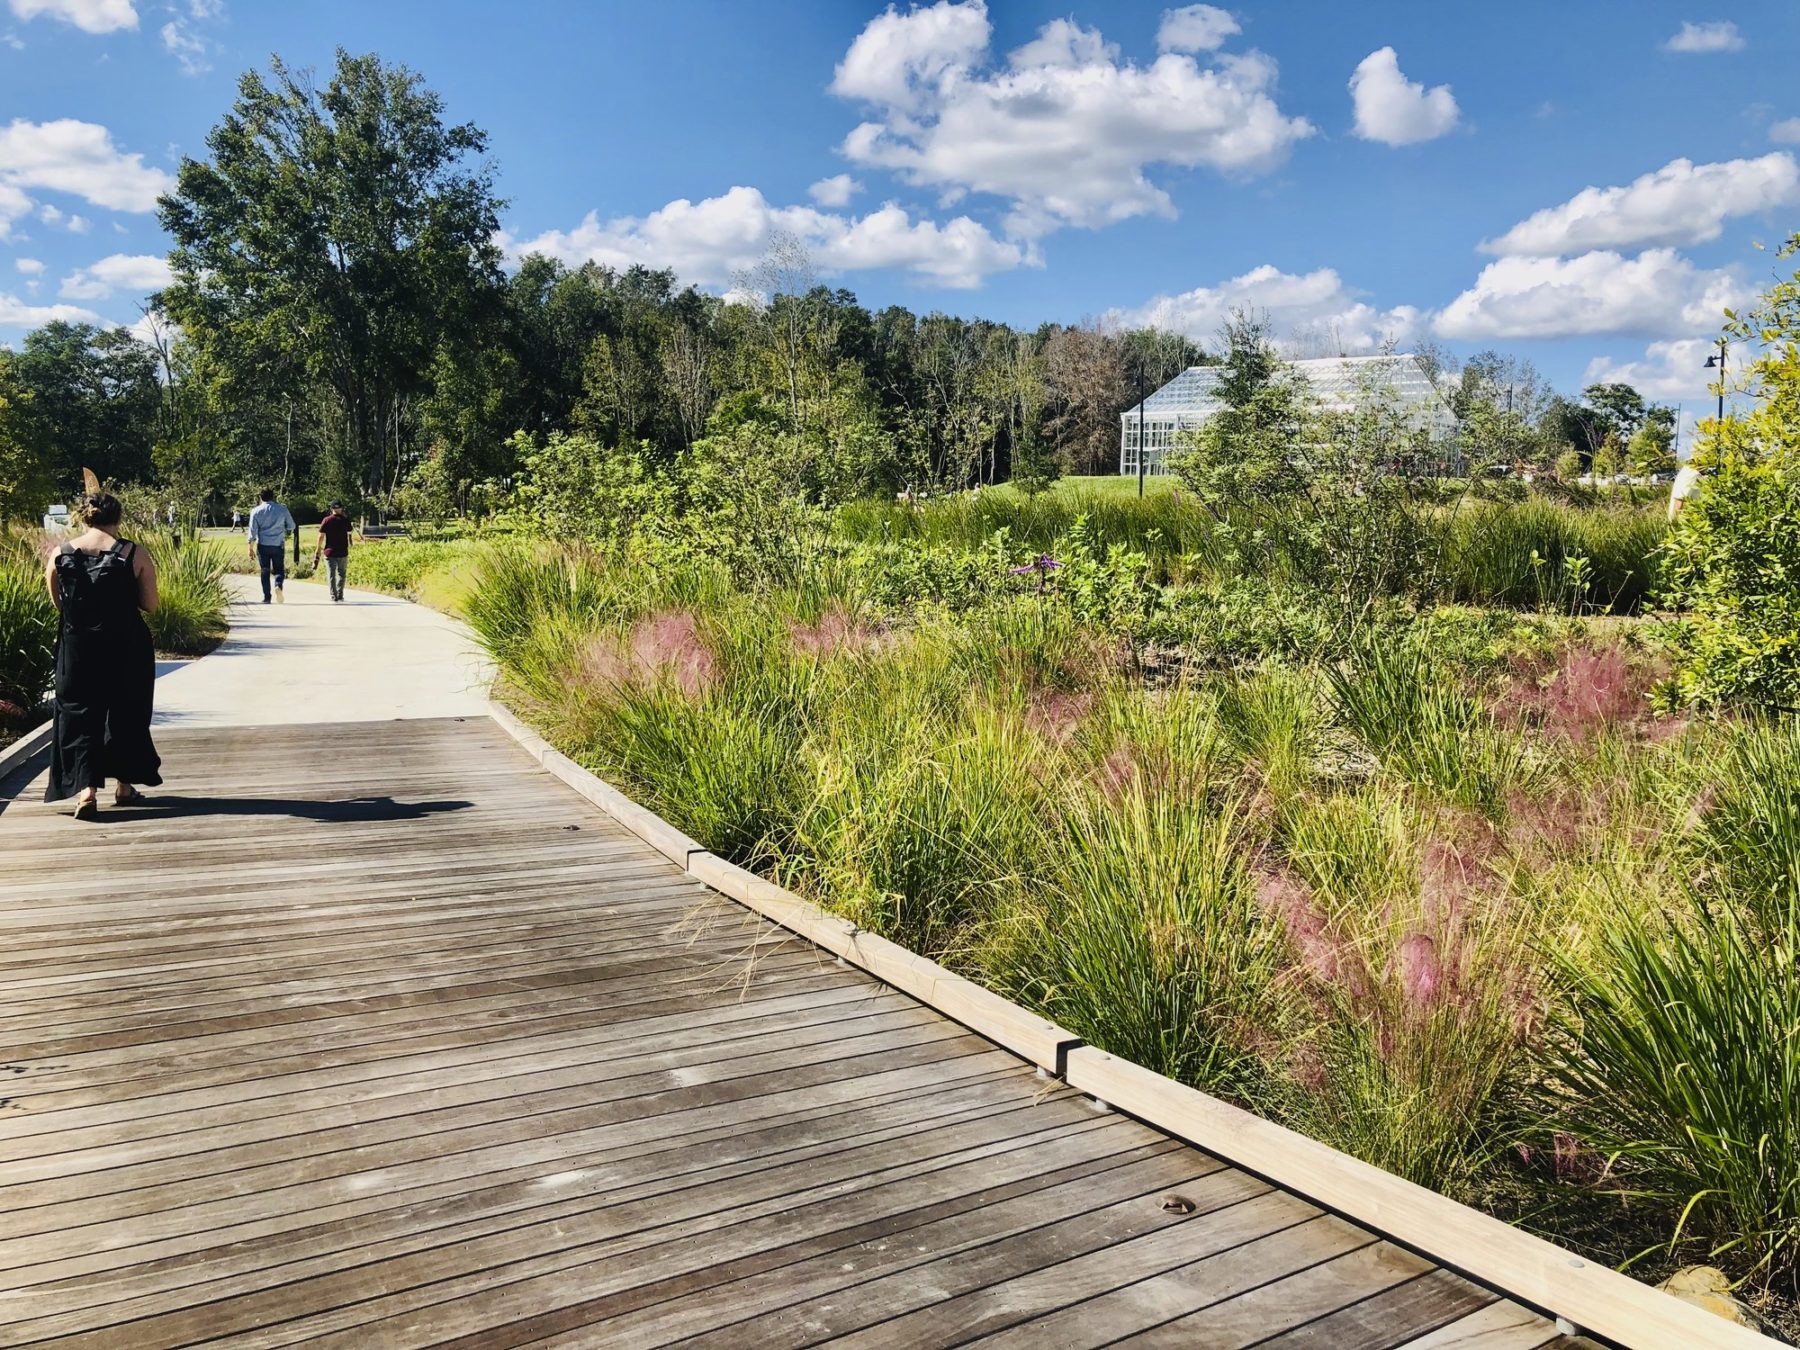 A boardwalk that is surrounded by natural-looking gardens